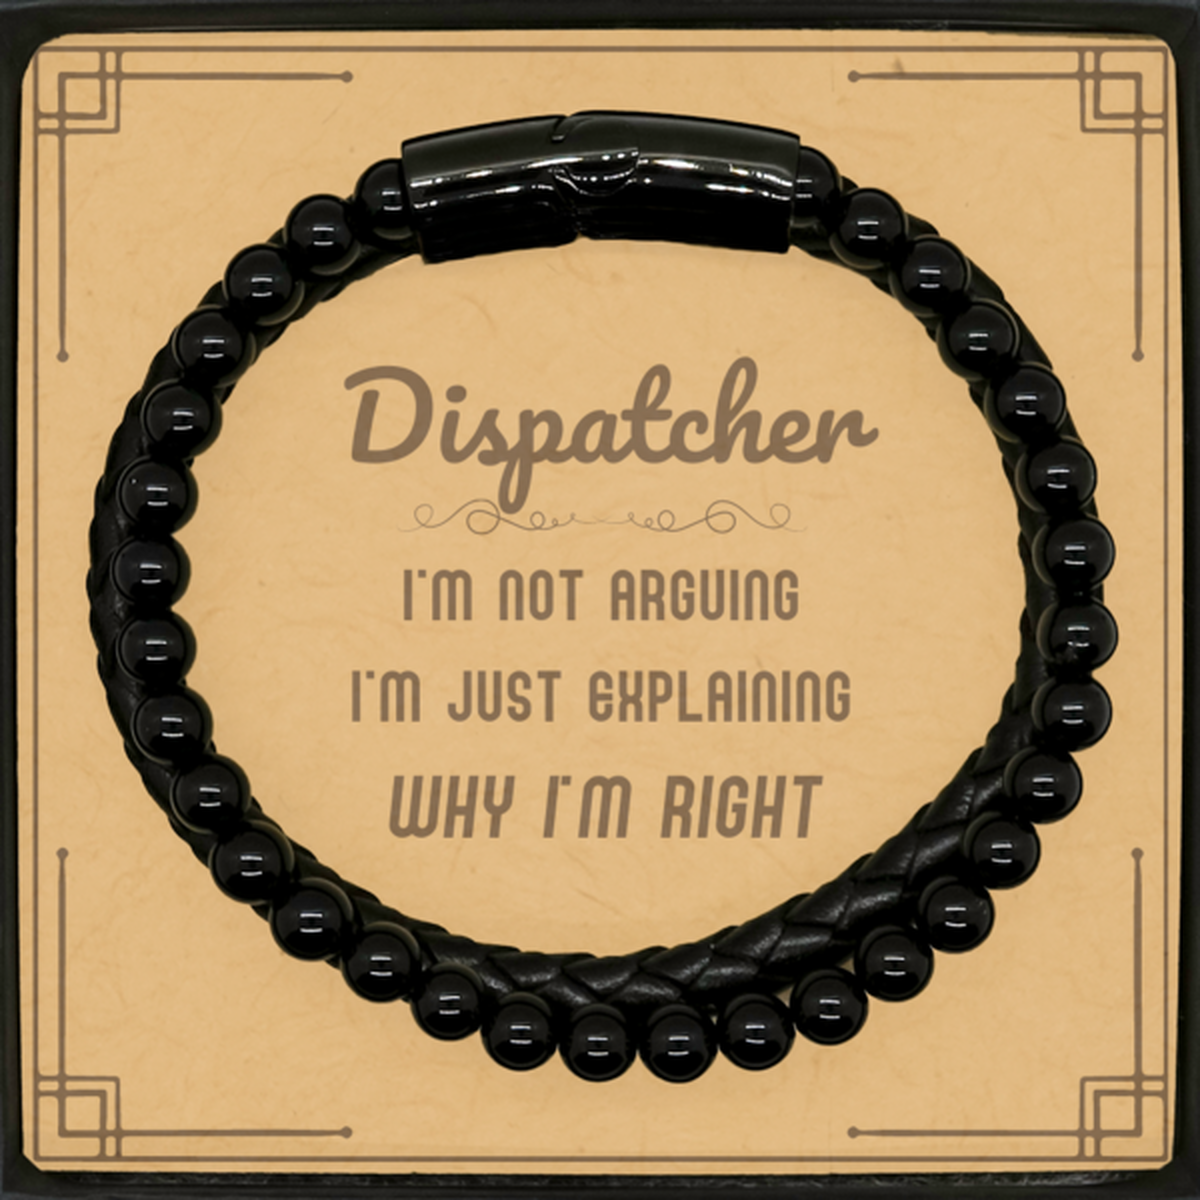 Dispatcher I'm not Arguing. I'm Just Explaining Why I'm RIGHT Stone Leather Bracelets, Funny Saying Quote Dispatcher Gifts For Dispatcher Message Card Graduation Birthday Christmas Gifts for Men Women Coworker